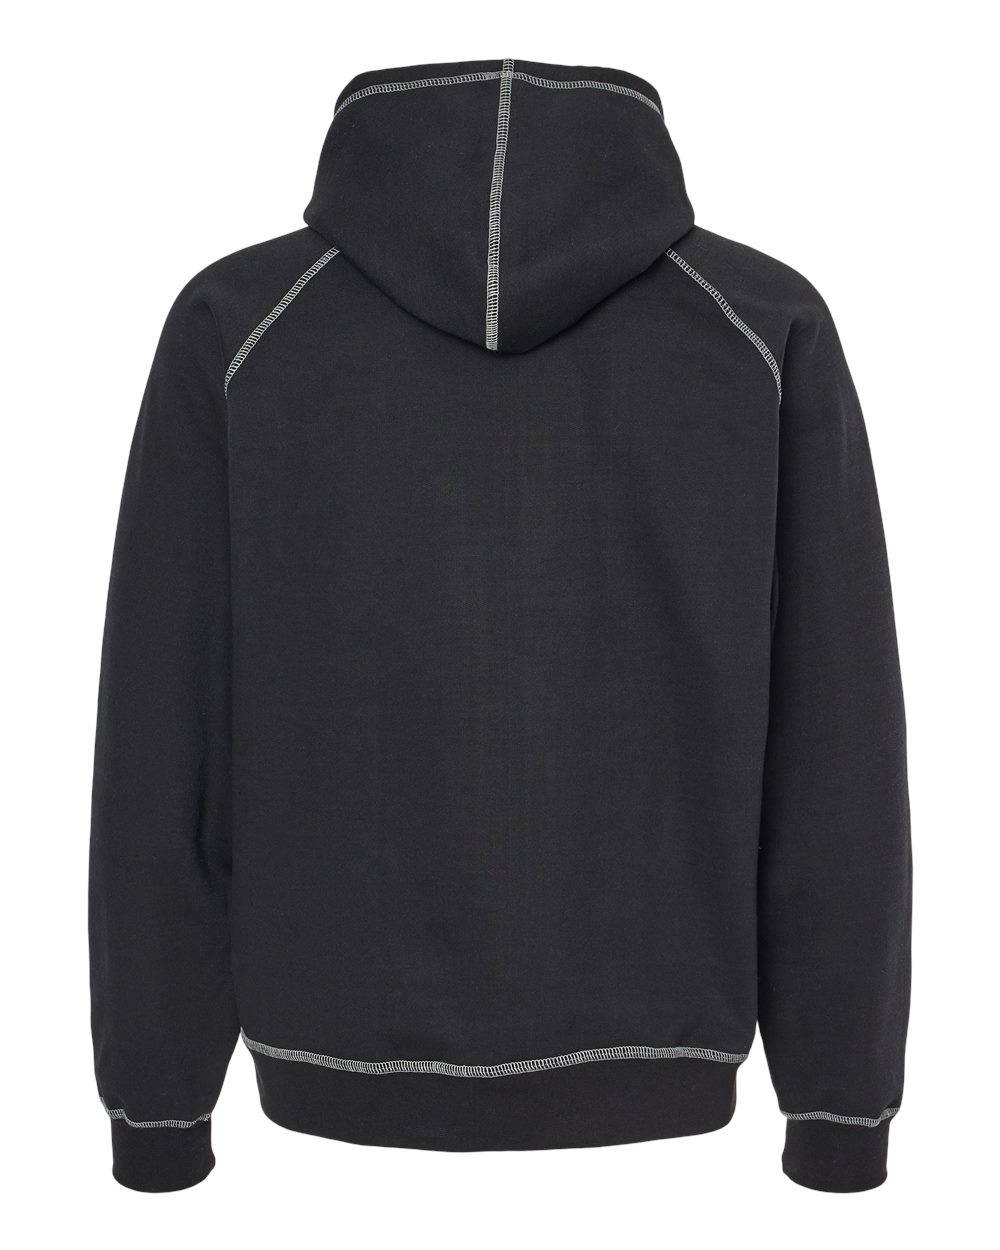 King Fashion KP8011 - Extra Heavy Hooded Pullover